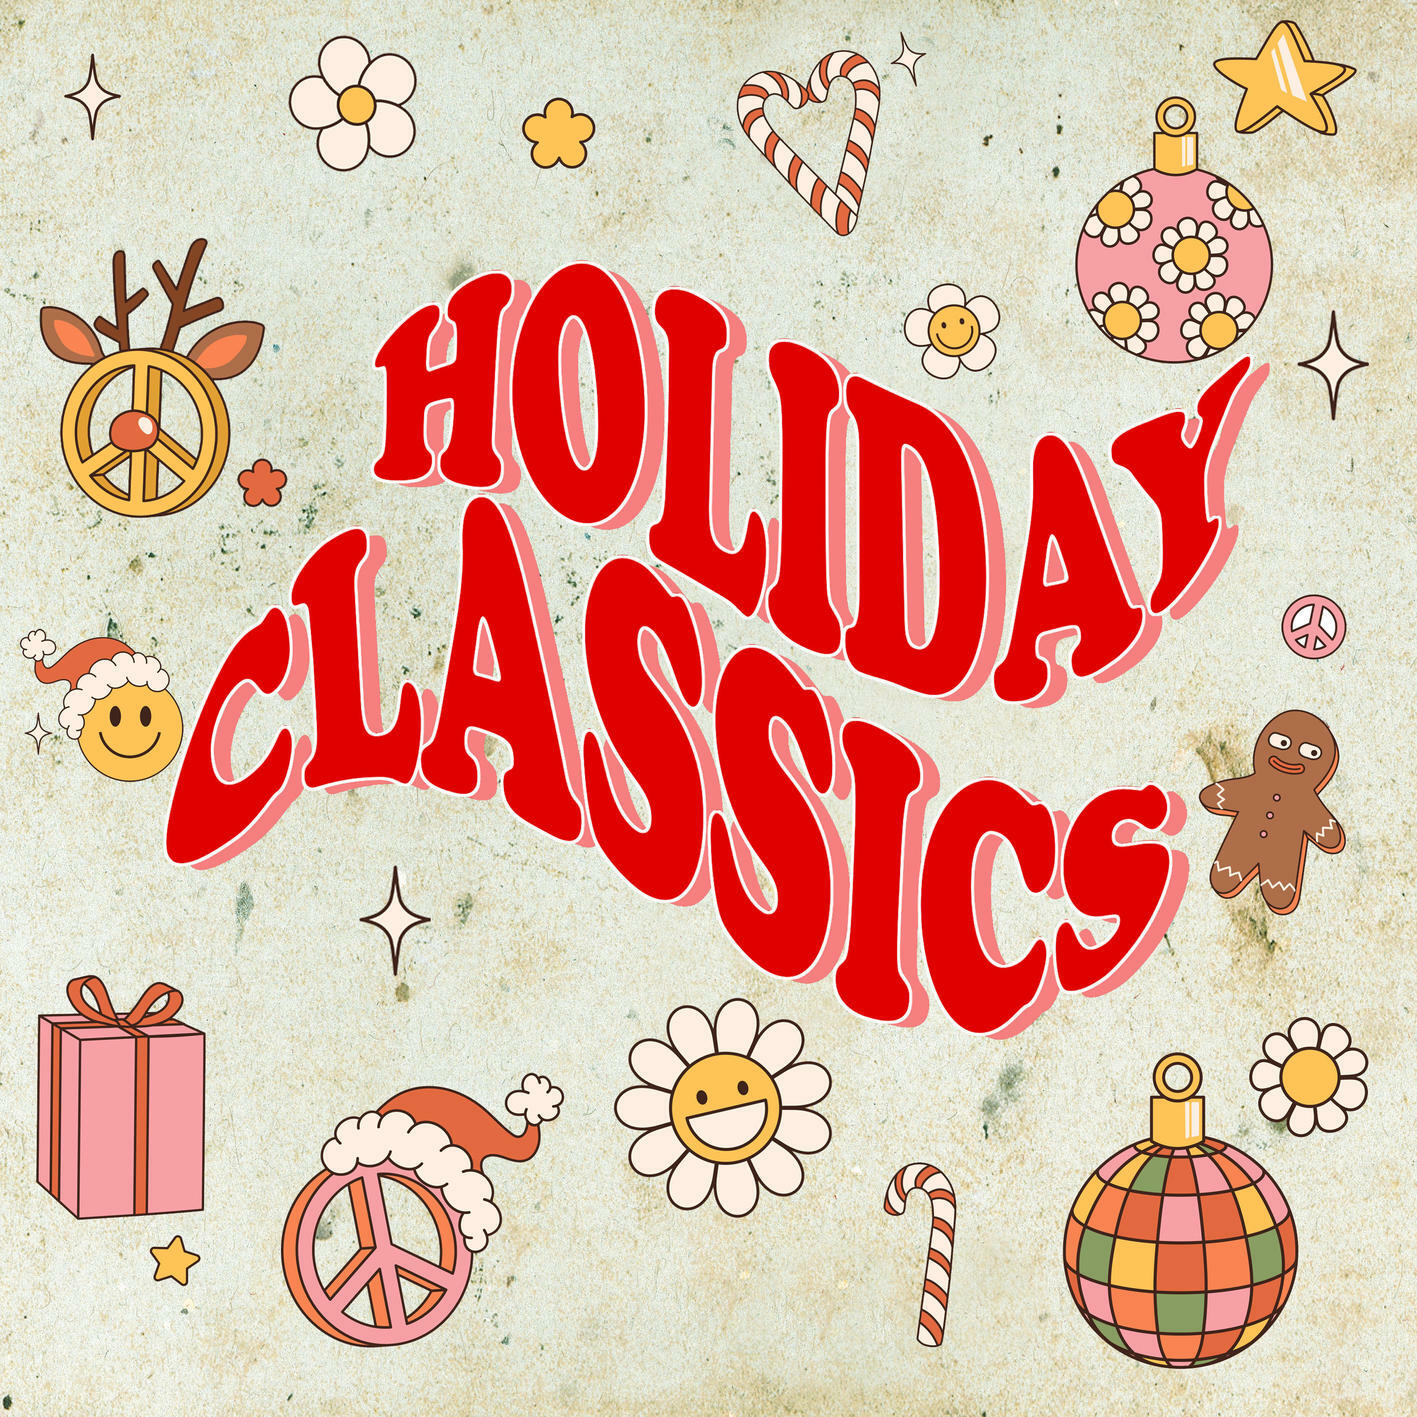 Christmas Songs - Holiday Classics of the 50s 60s 70s | iHeart